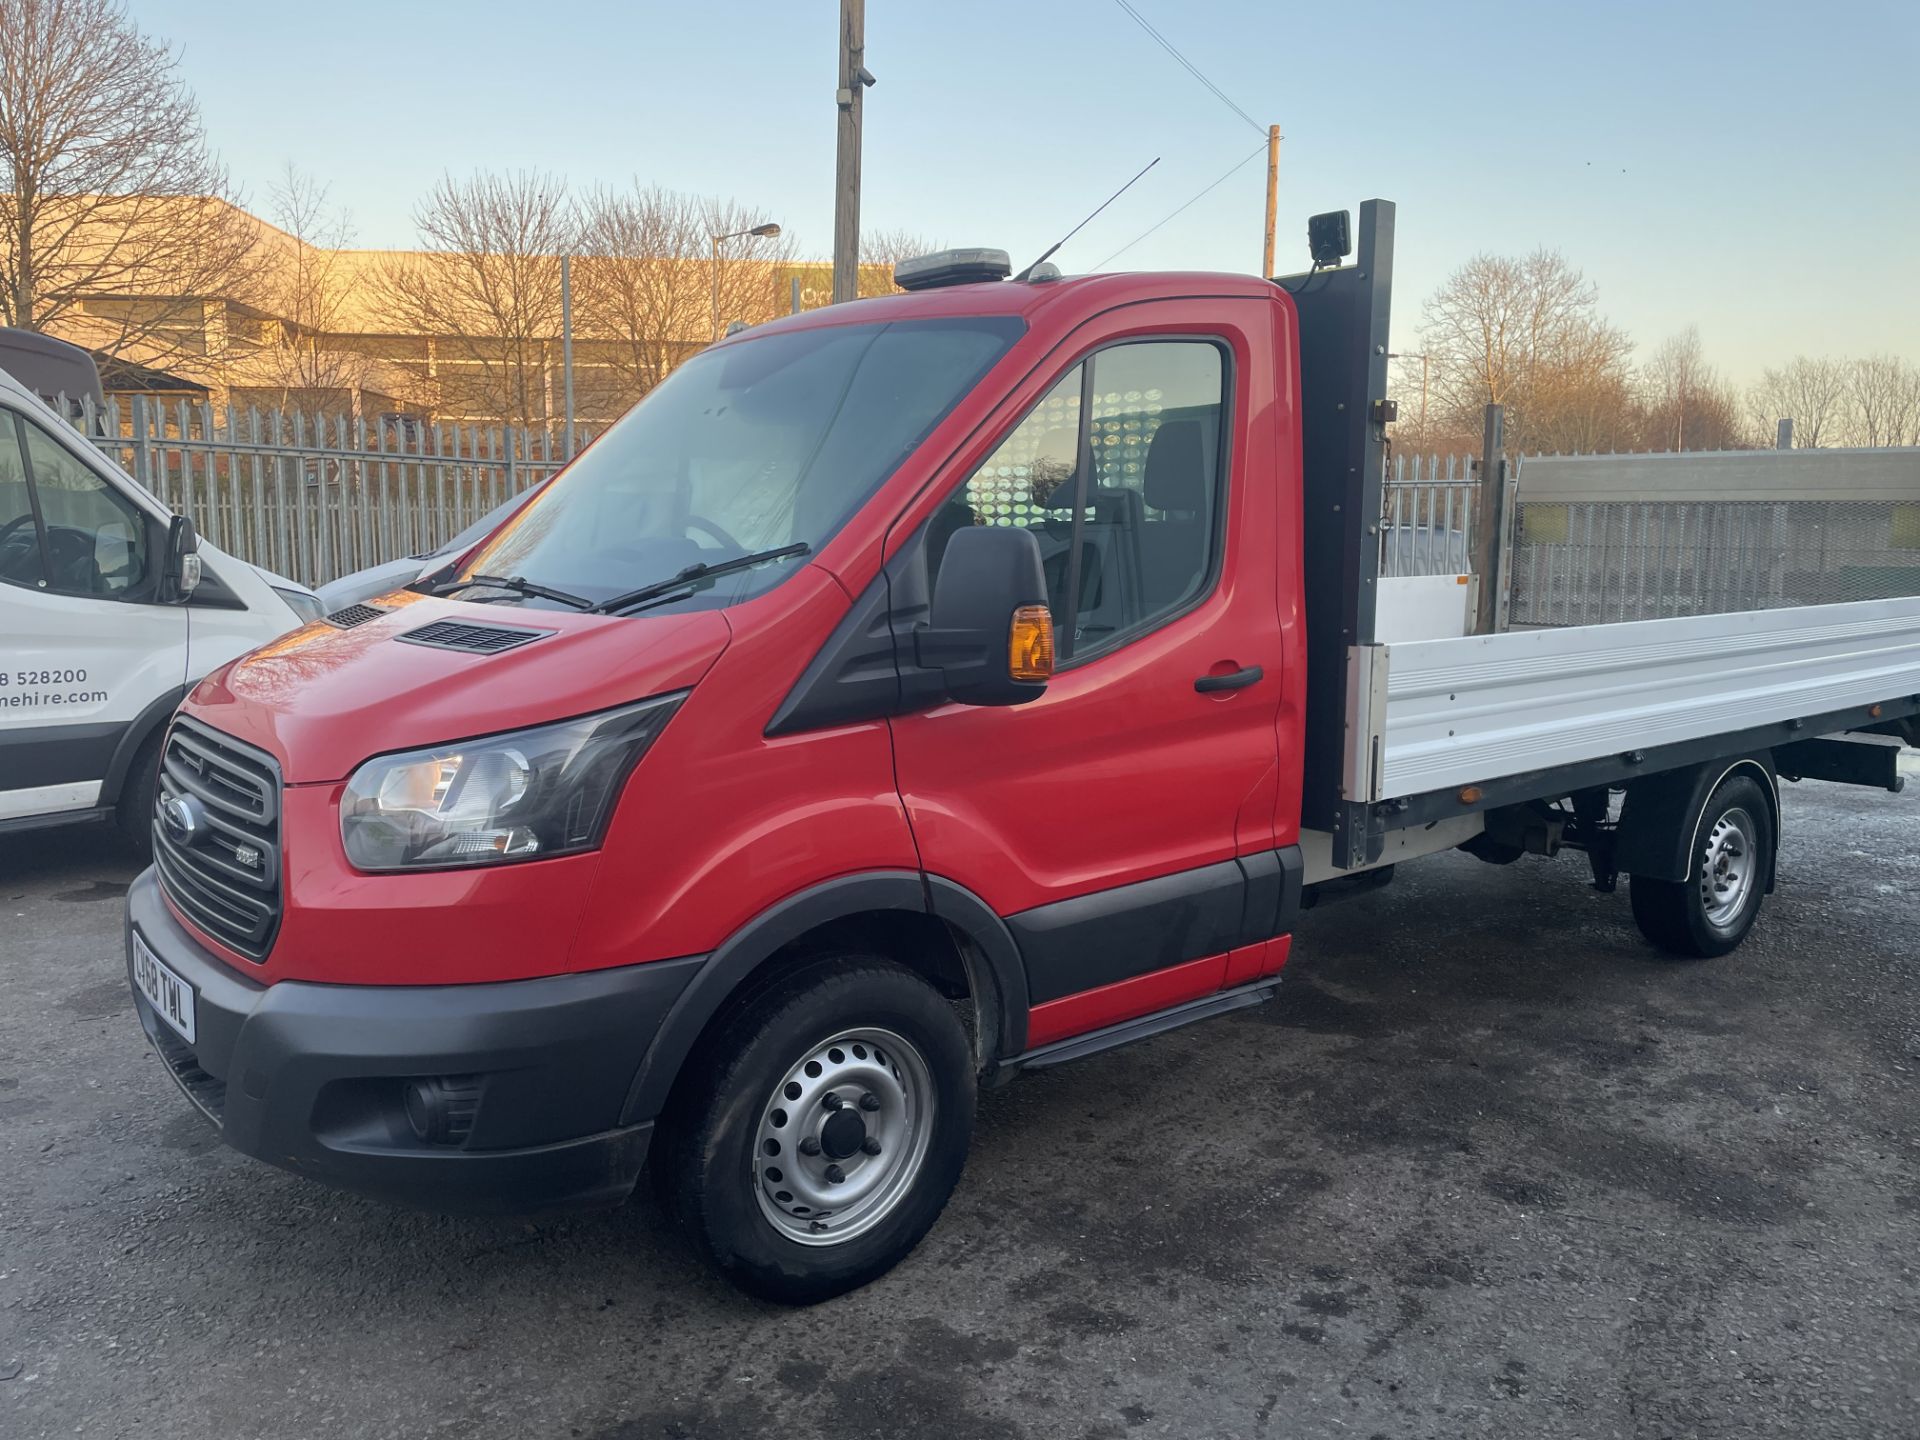 FORD TRANSIT 350 L3 DROPSIDE WITH TAIL LIFT *PLUS VAT*